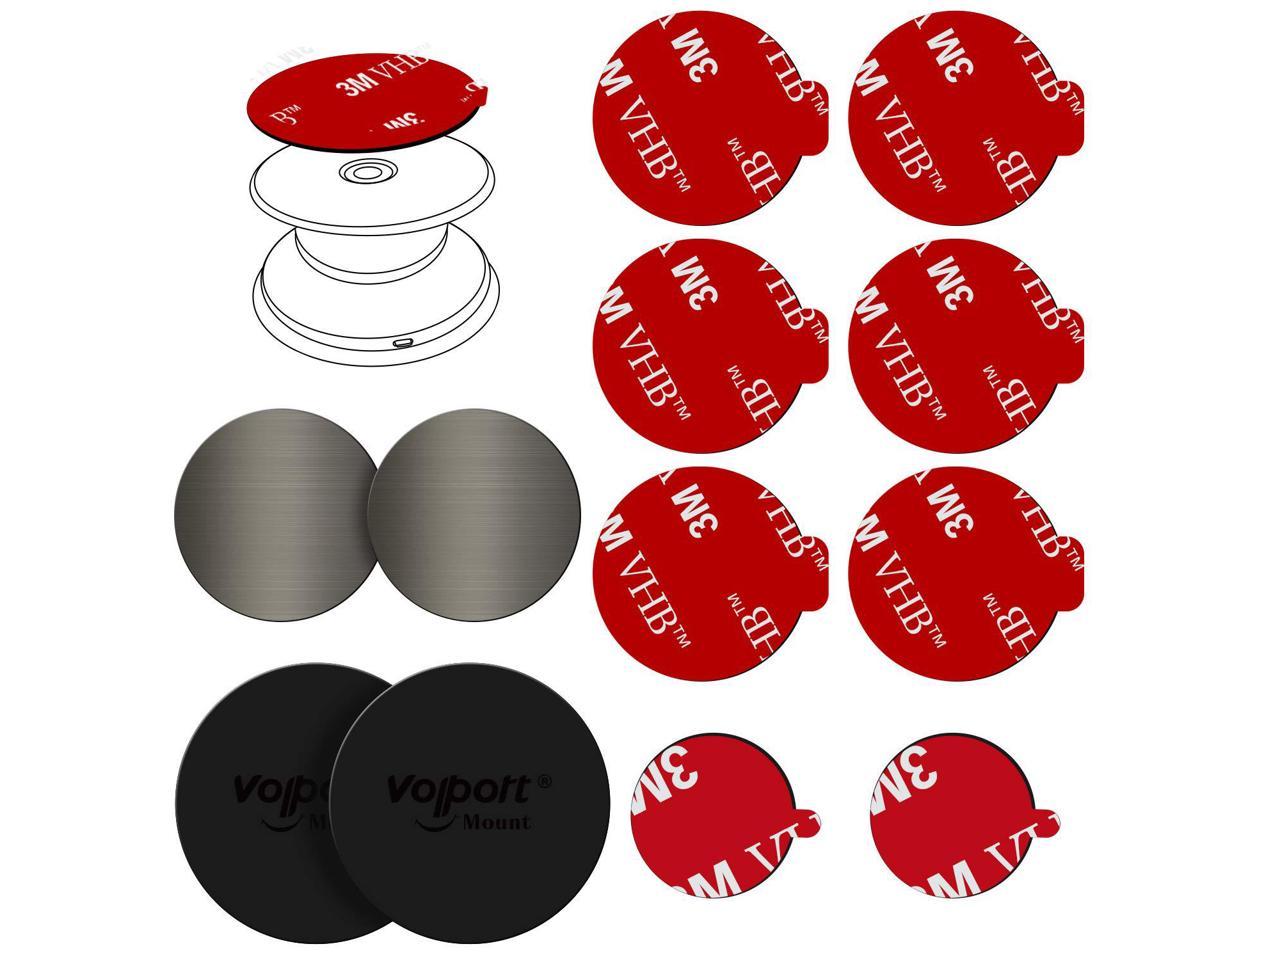 16 x 3M Tax Disc Holder Original Sticky Pads TRANSPARANT double sided sticky Red Film Peel Back HIGH PERFORMANCE 3M 